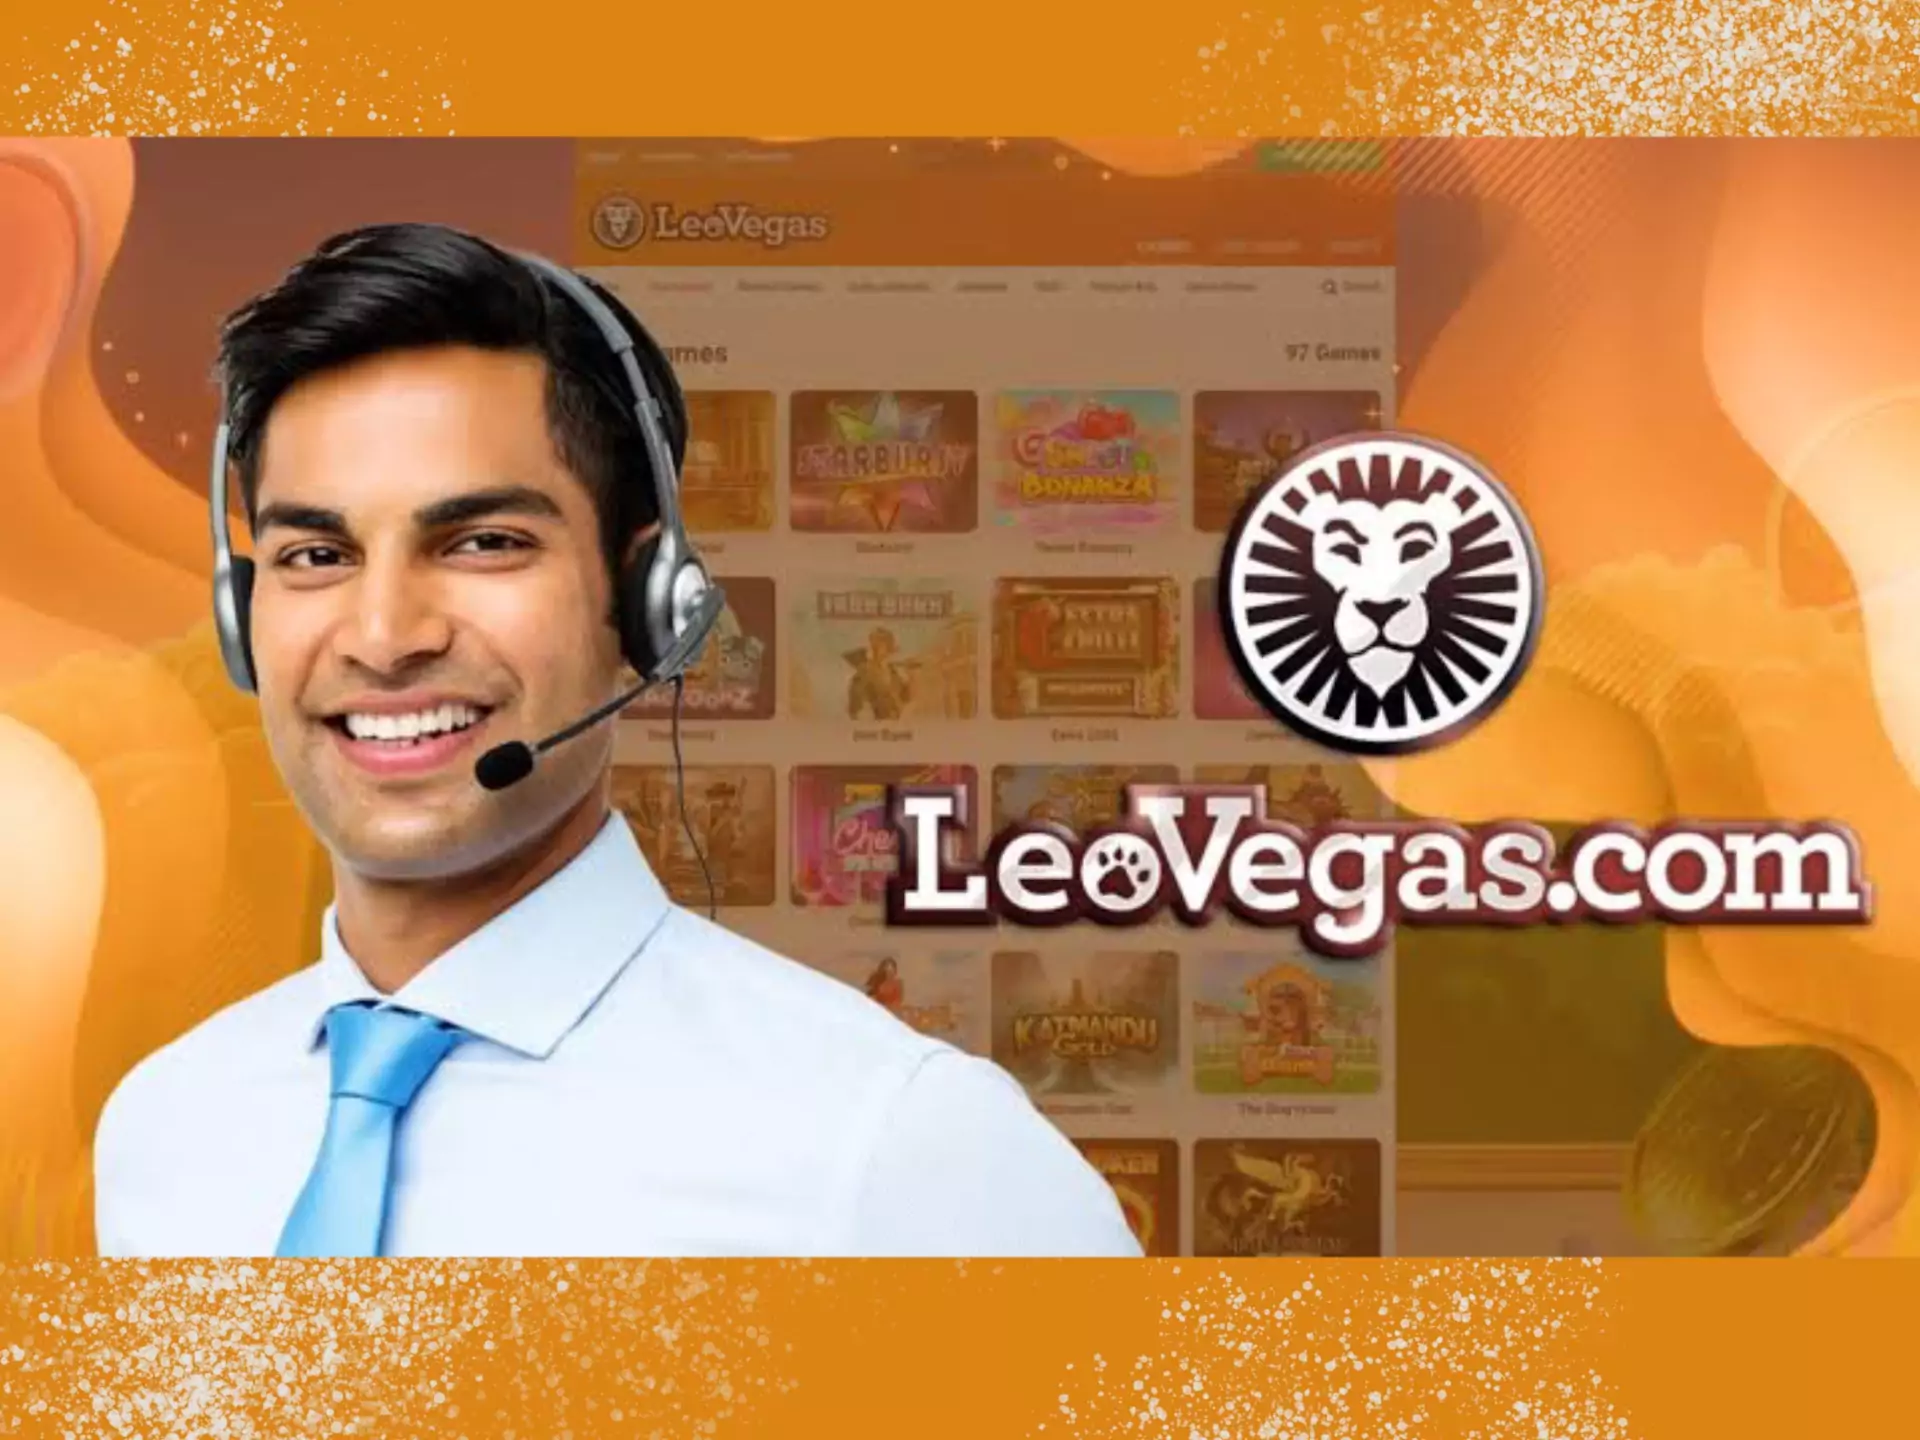 Contact the LeoVegas support team to solve any betting-related problems.